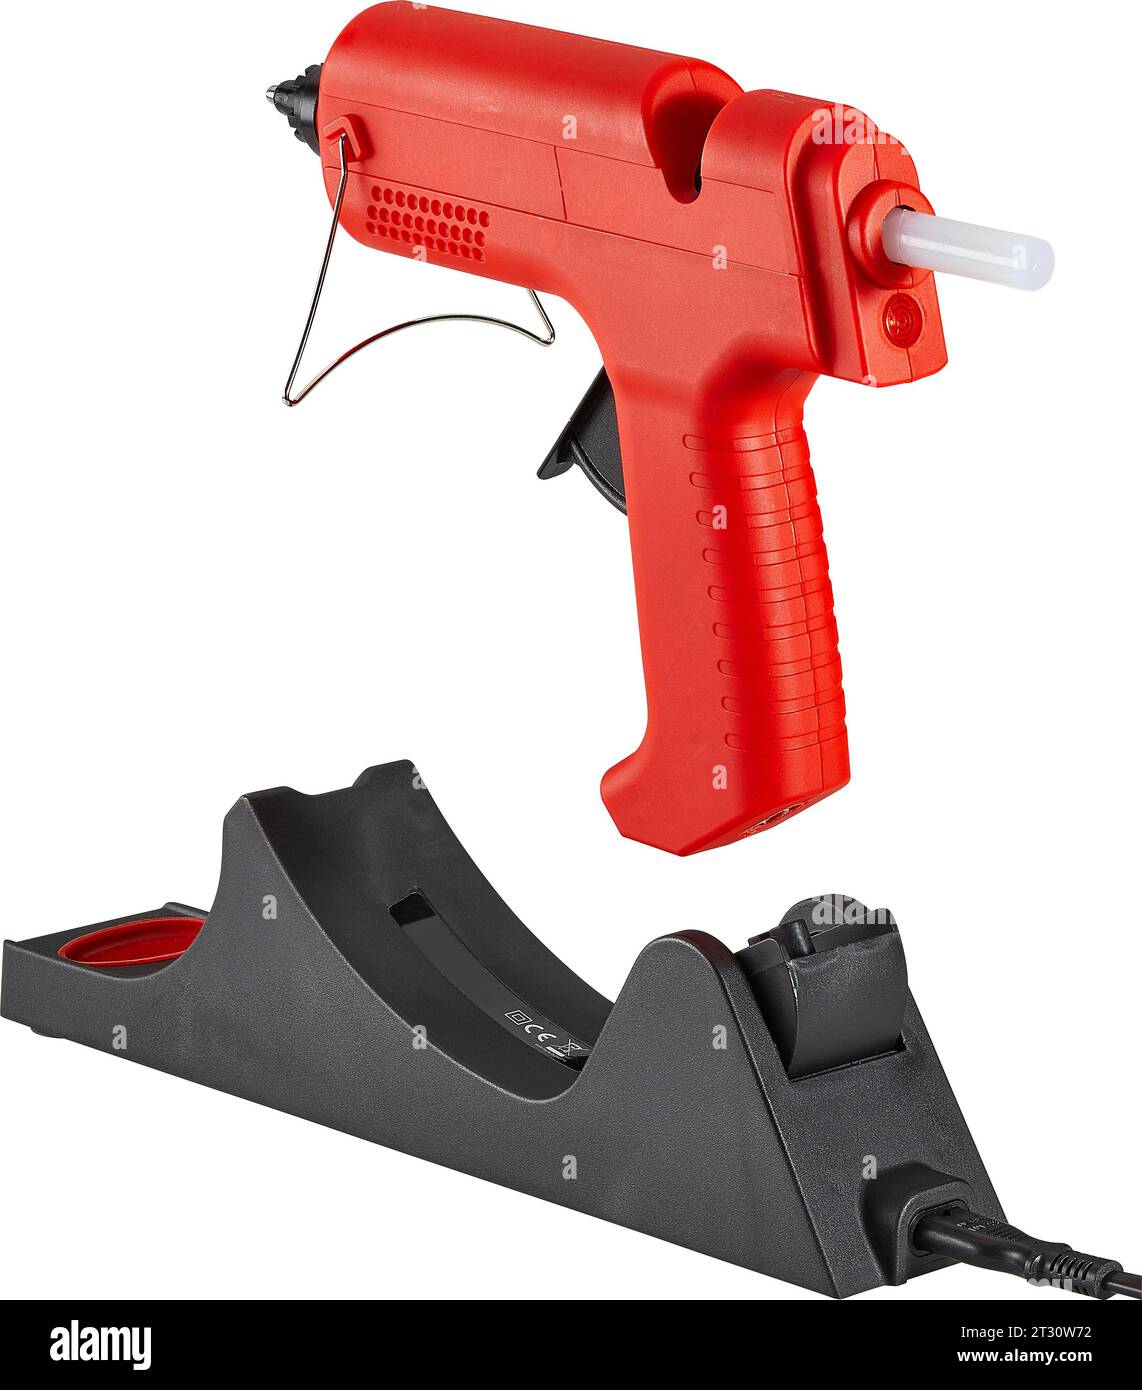 working with red hot glue gun Stock Photo